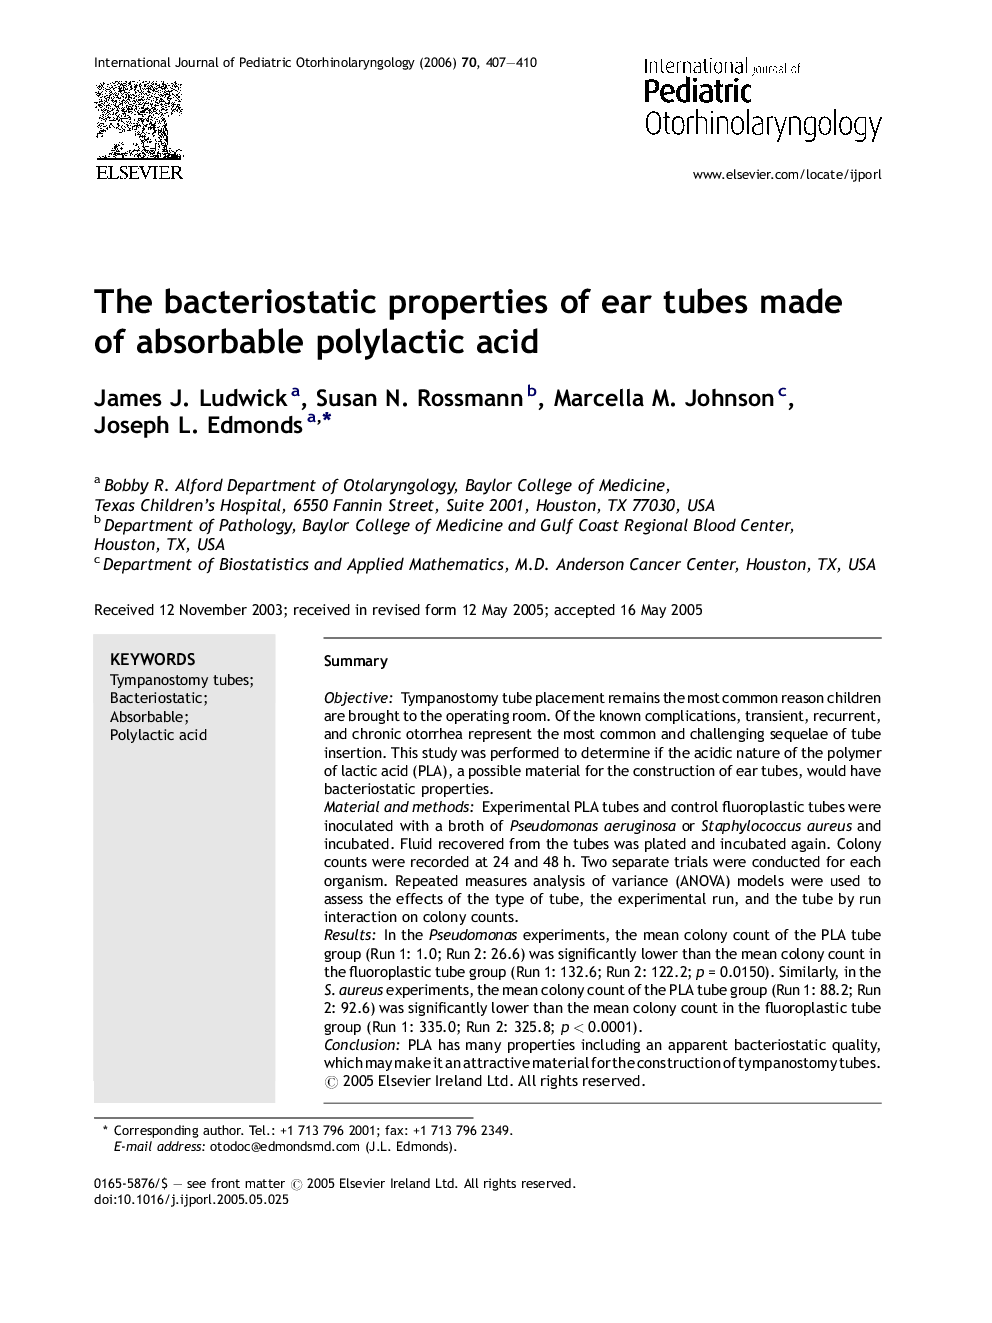 The bacteriostatic properties of ear tubes made of absorbable polylactic acid